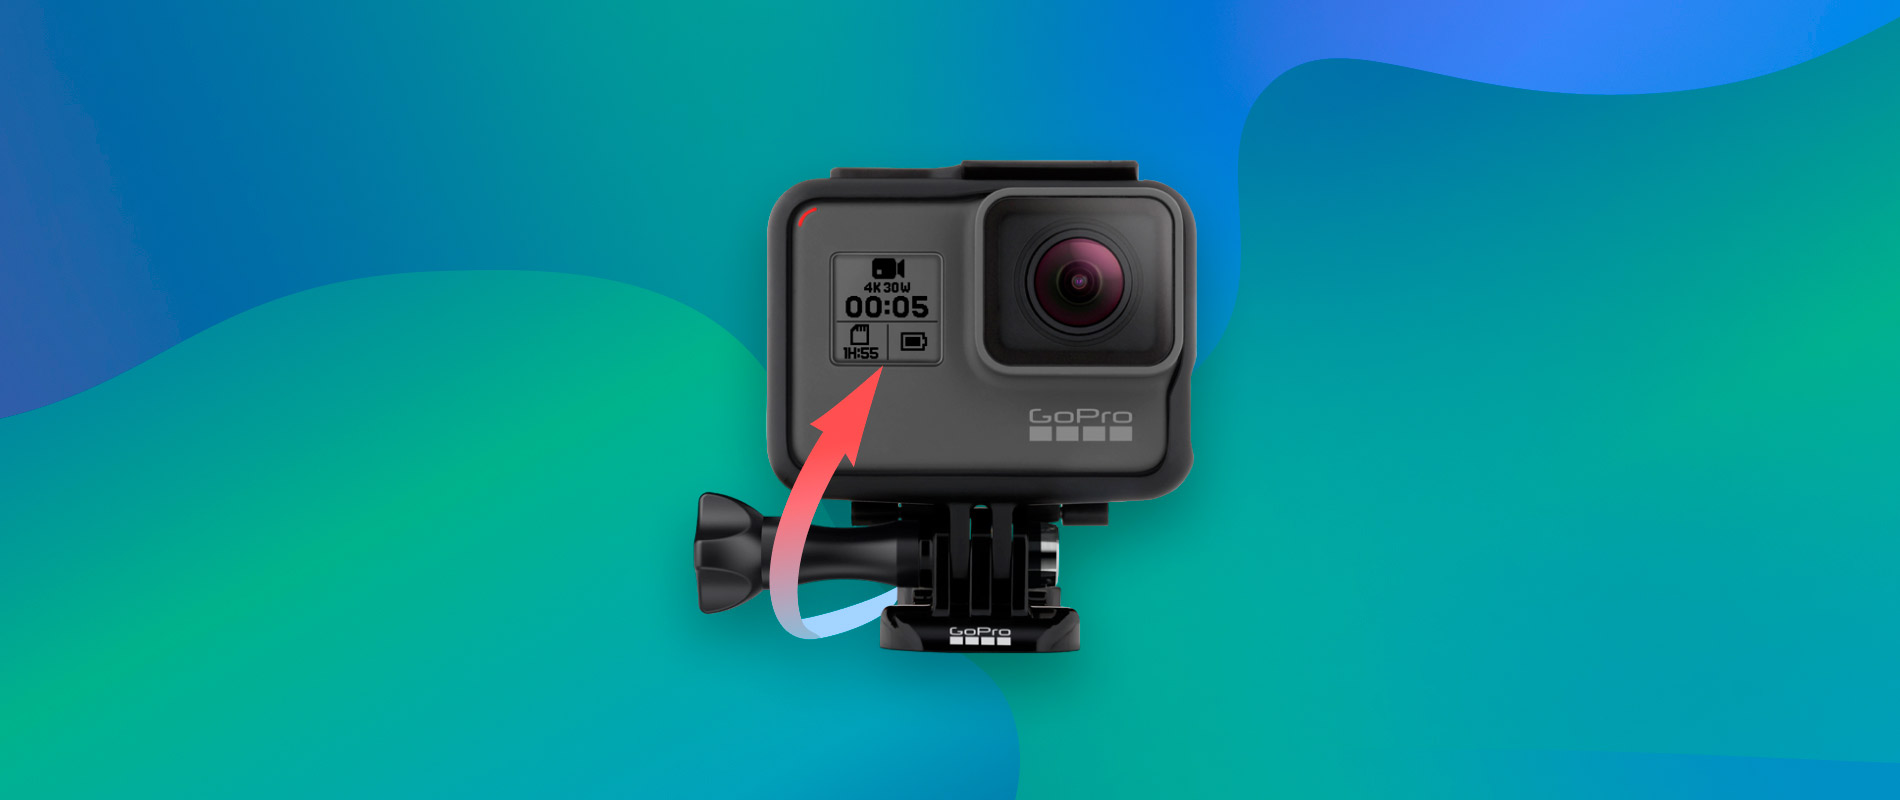 experience birth Line of sight GoPro File Recovery: How to Recover Deleted GoPro Videos & Pictures